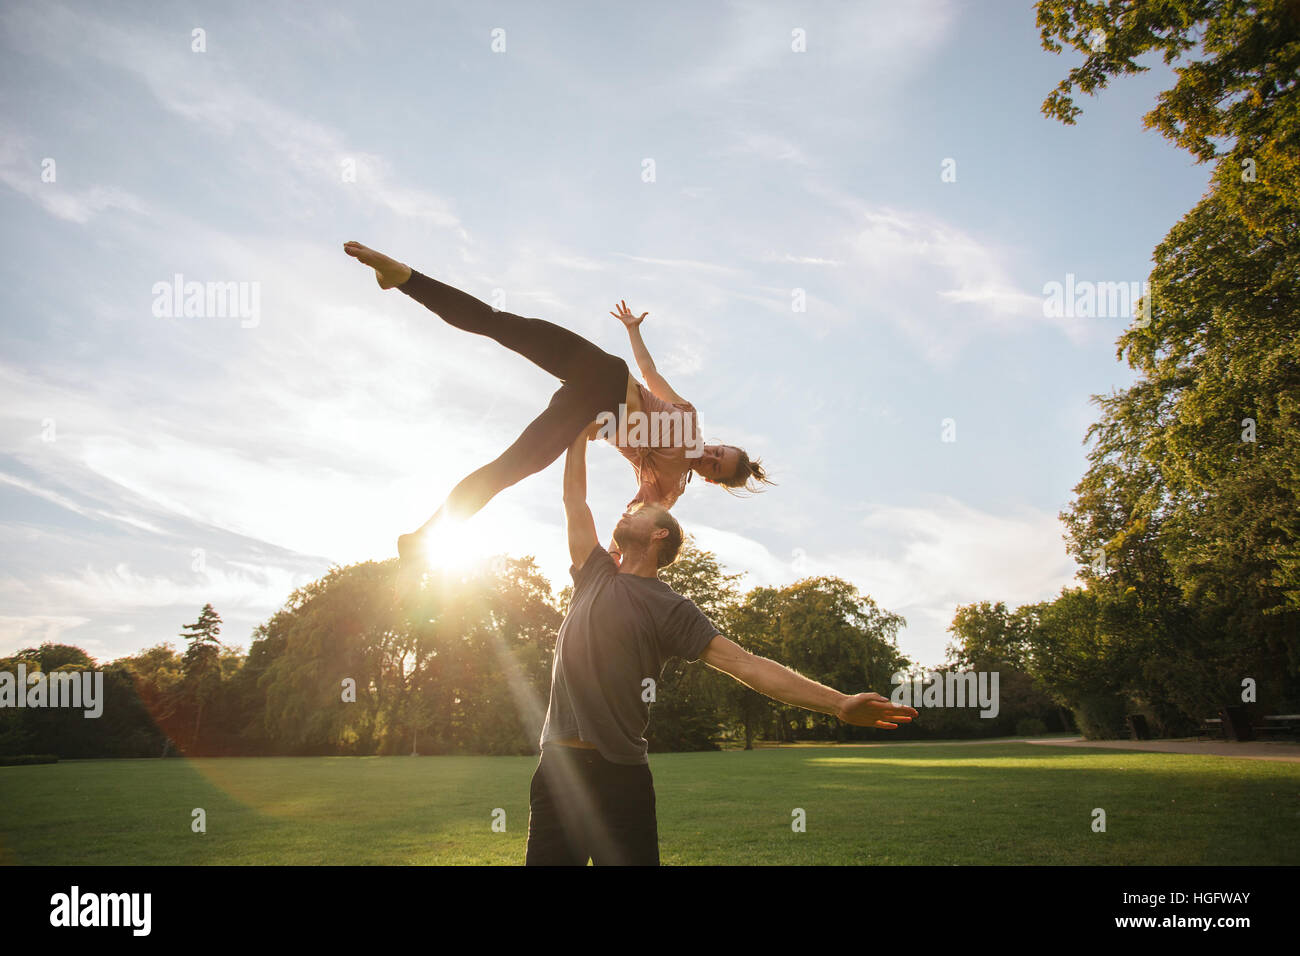 Shot of young couple doing acroyoga. Young man lifting and balancing woman on his hand at the park. Stock Photo